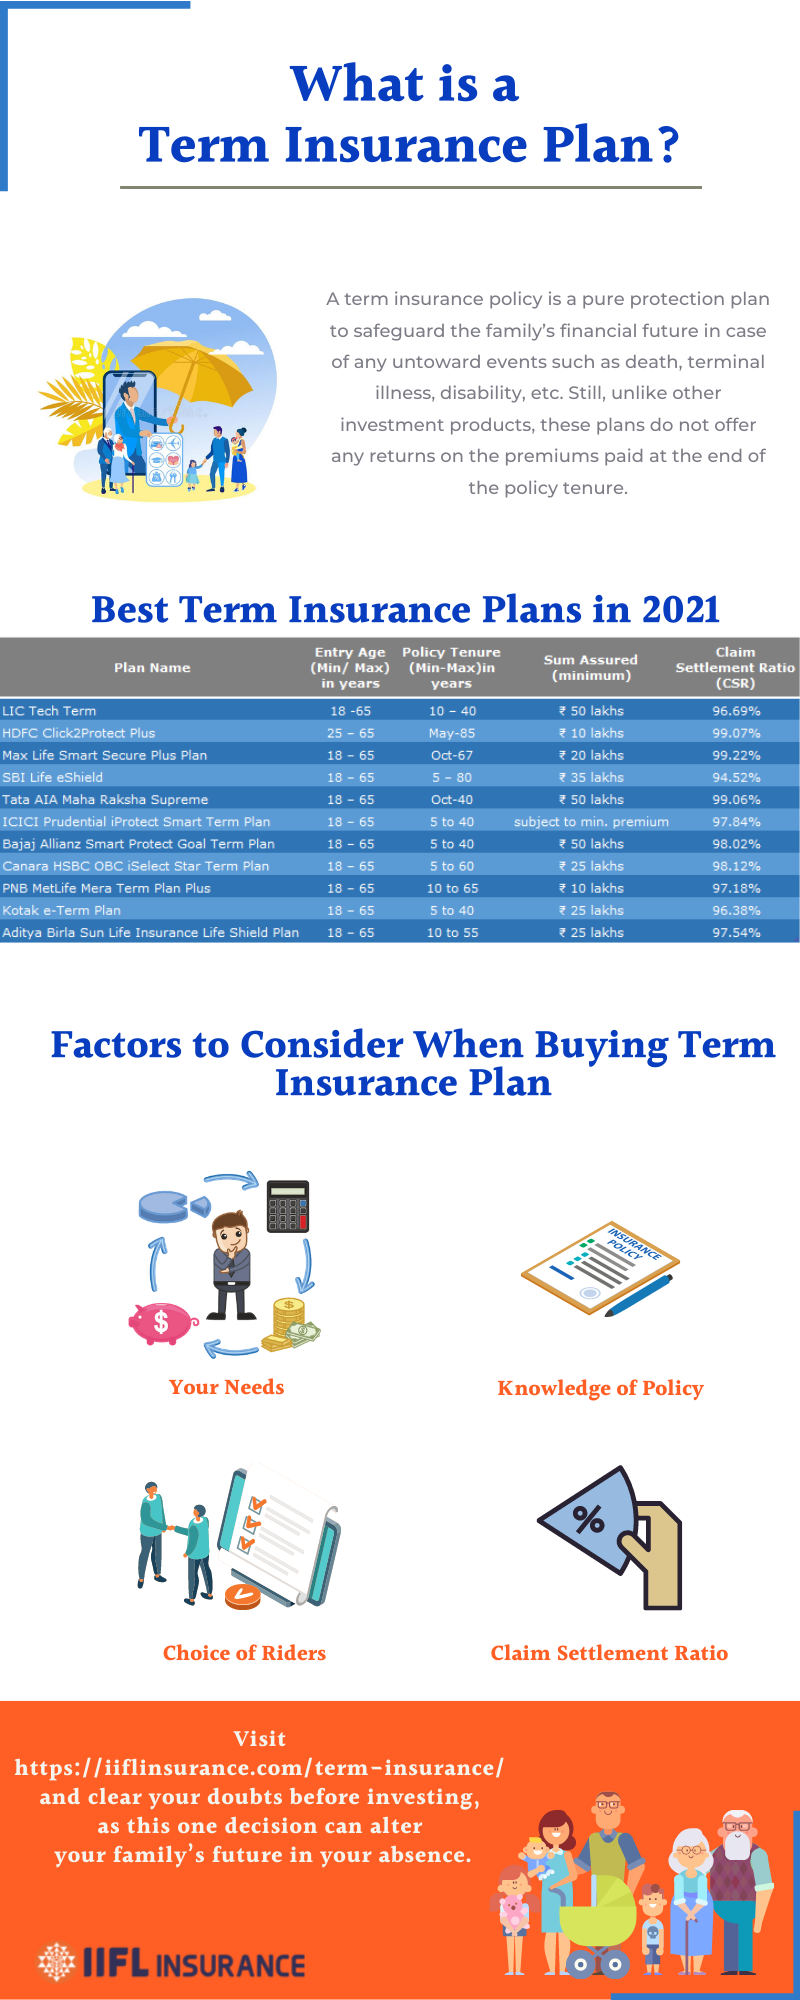 List of Best Term Insurance Plans in India 2021